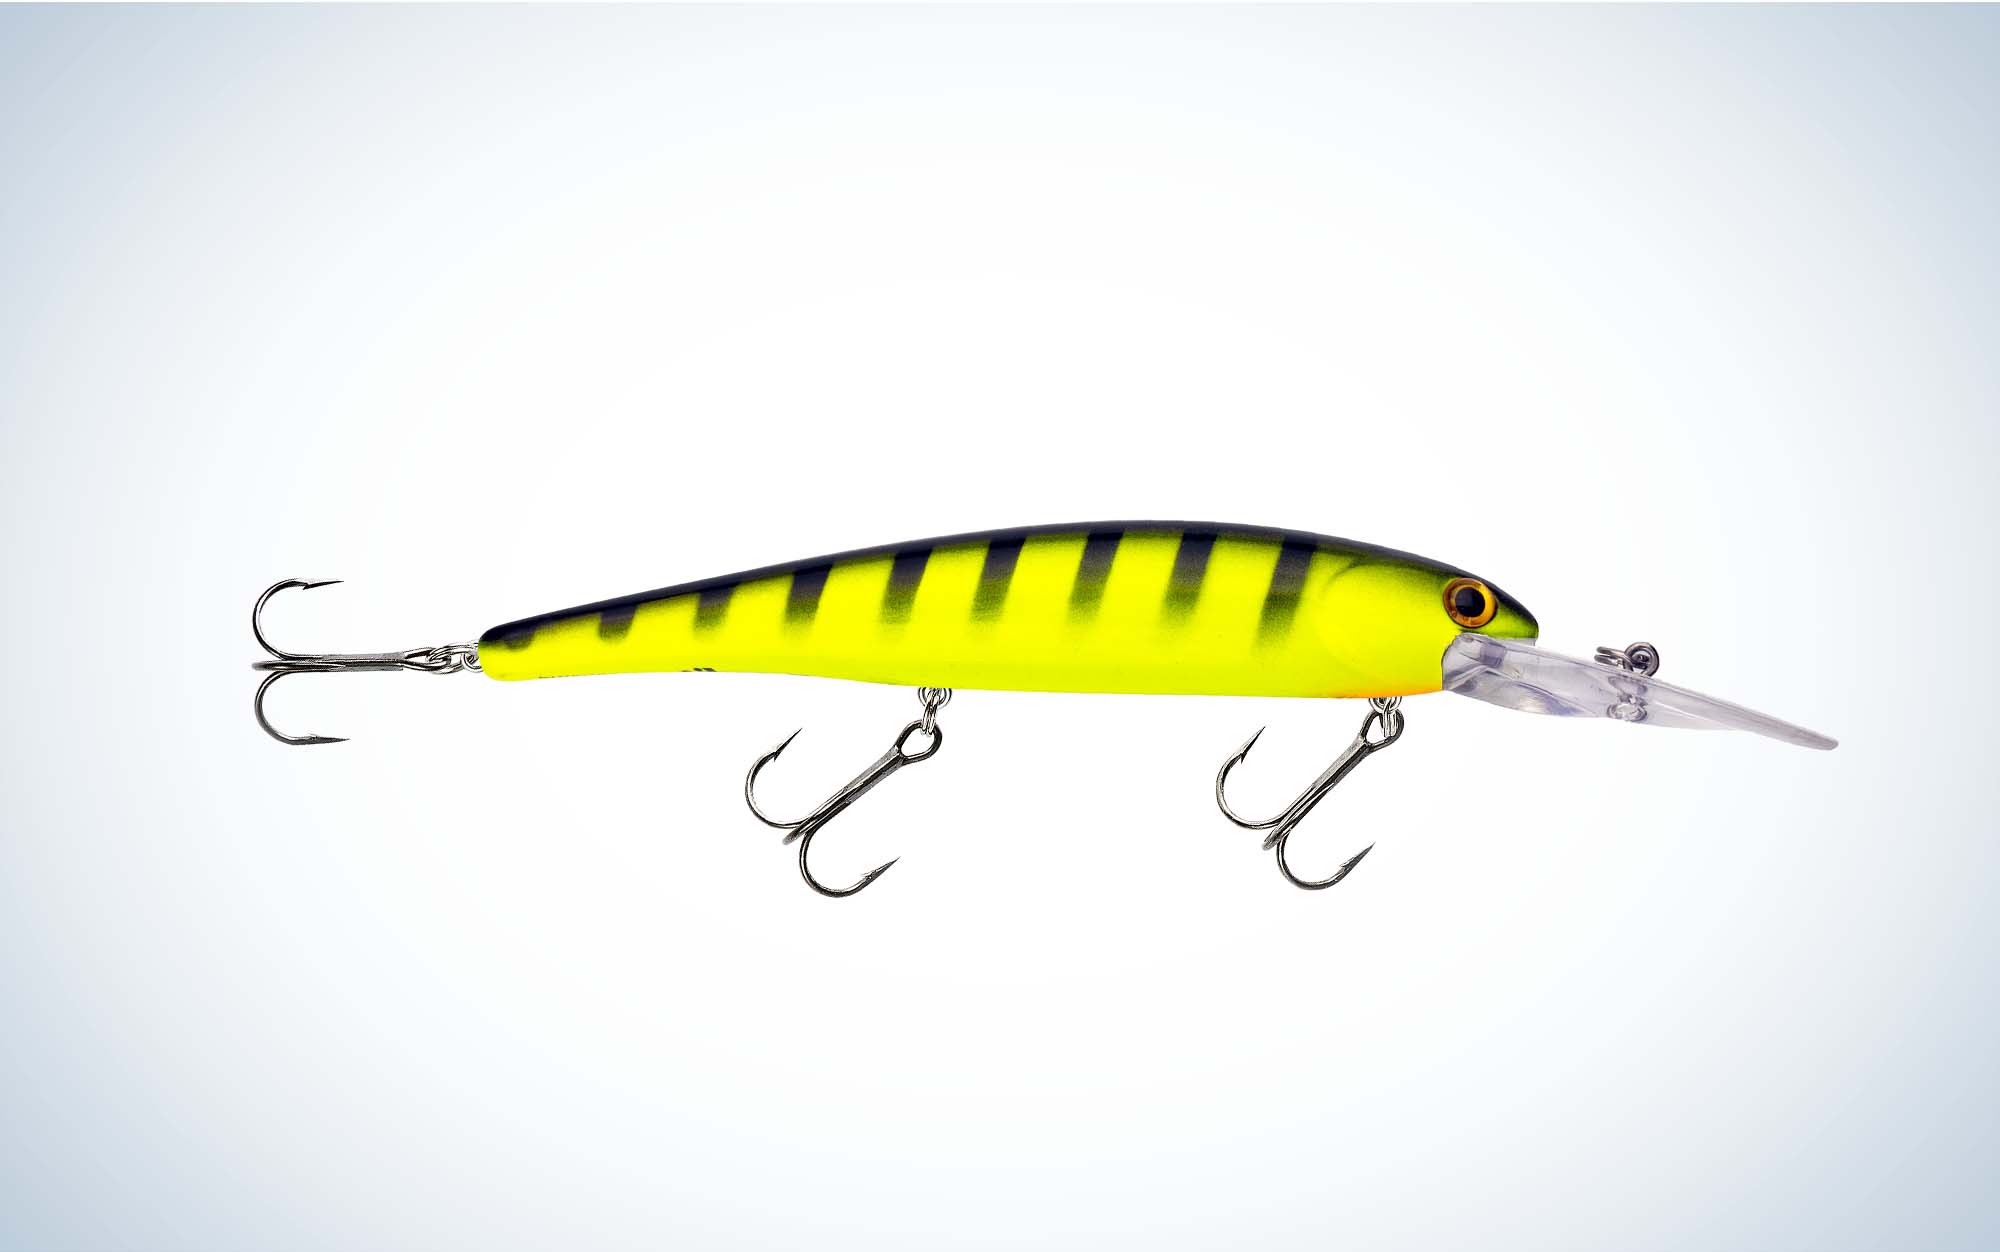 New Soft-Plastic Fishing Lures at the ICAST International Tackle